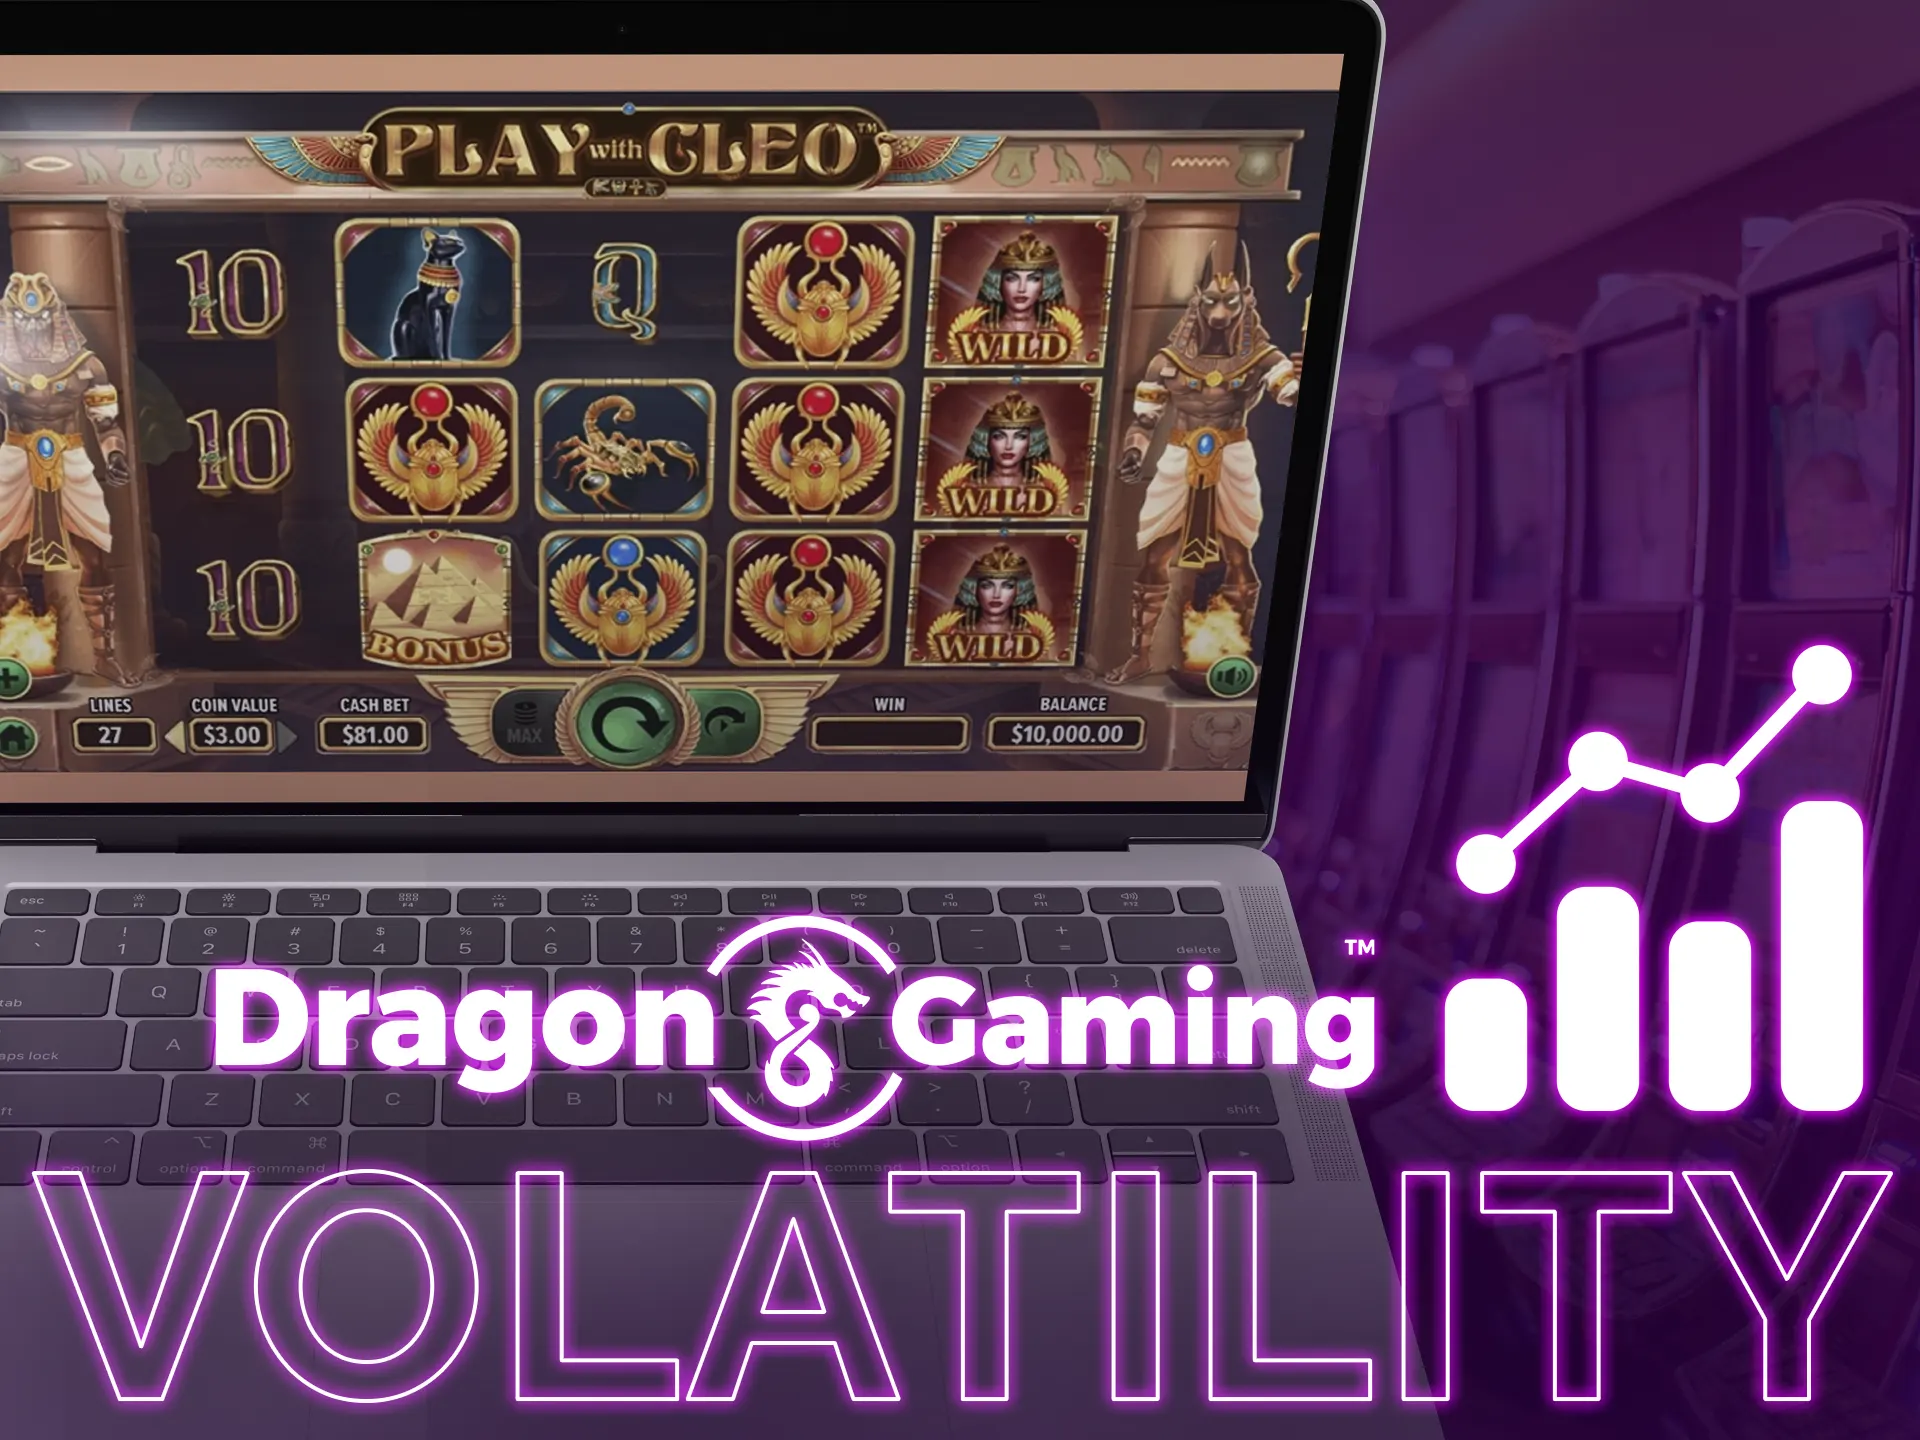 Dragon Gaming slots offer medium to high volatility for big wins.